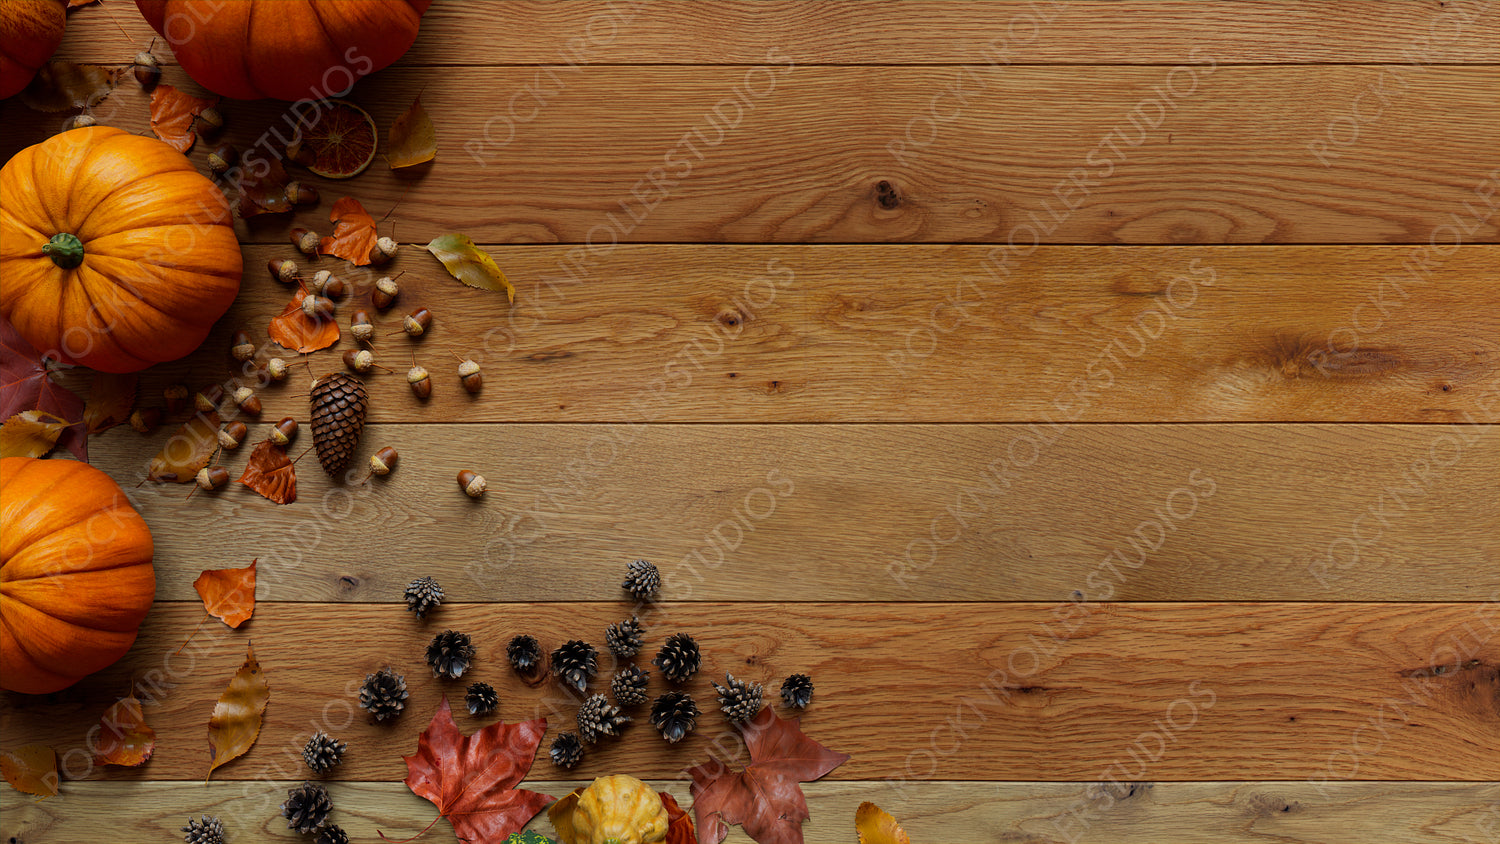 Top down view of Natural wood Surface with leaves, Pumpkins and Acorns.